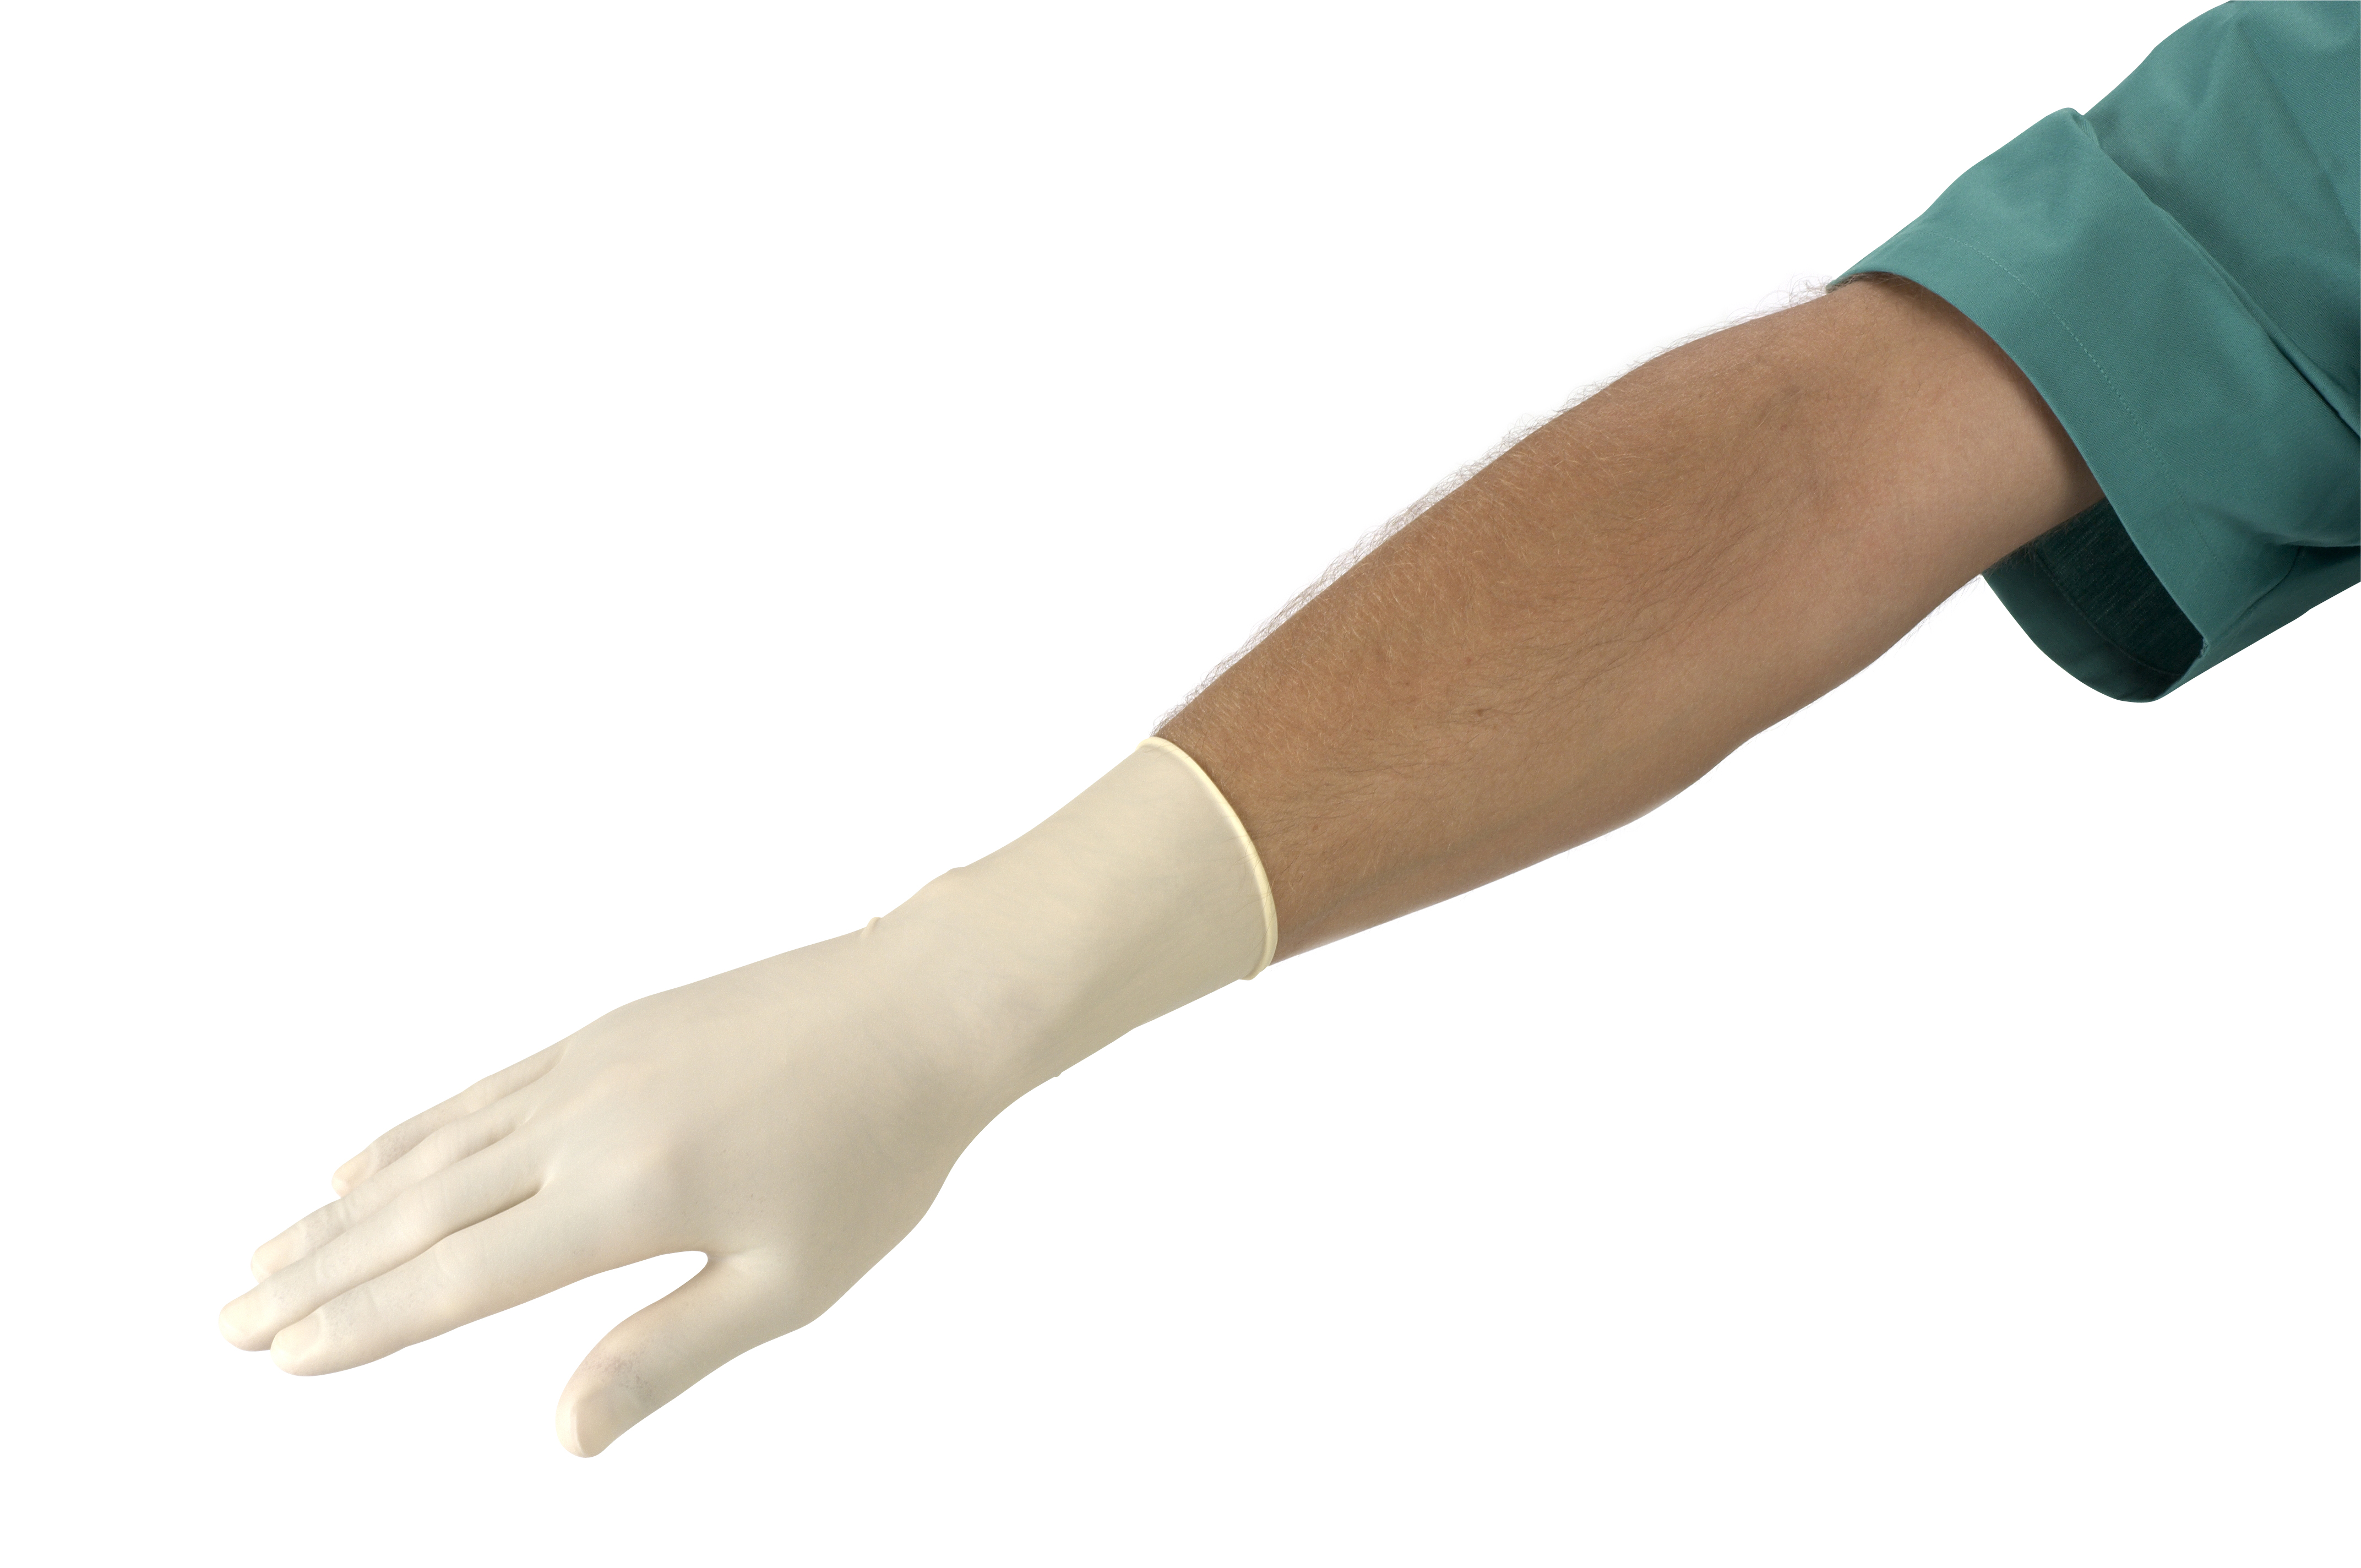 KRUTEX Surgical Gloves PF size 7.0, 50/pk